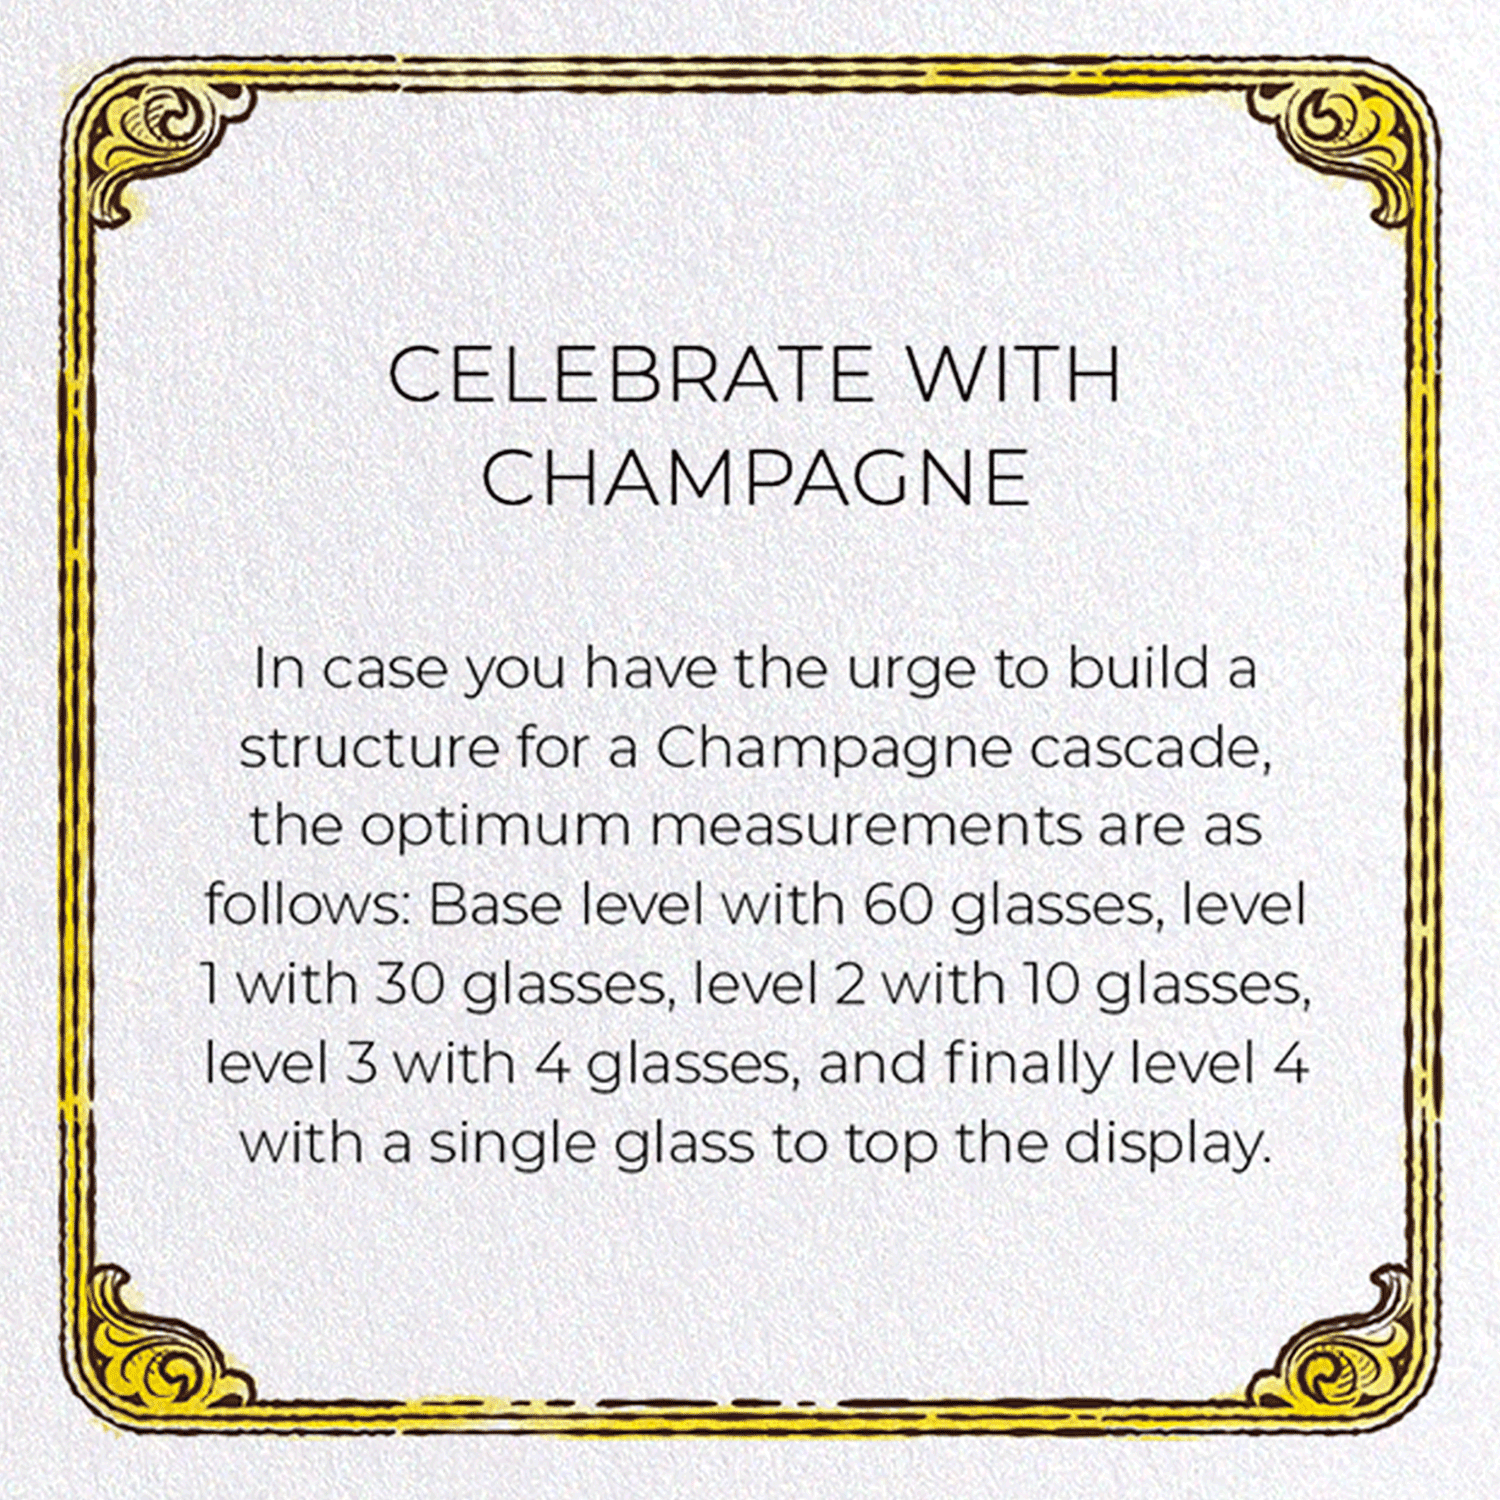 CELEBRATE WITH CHAMPAGNE